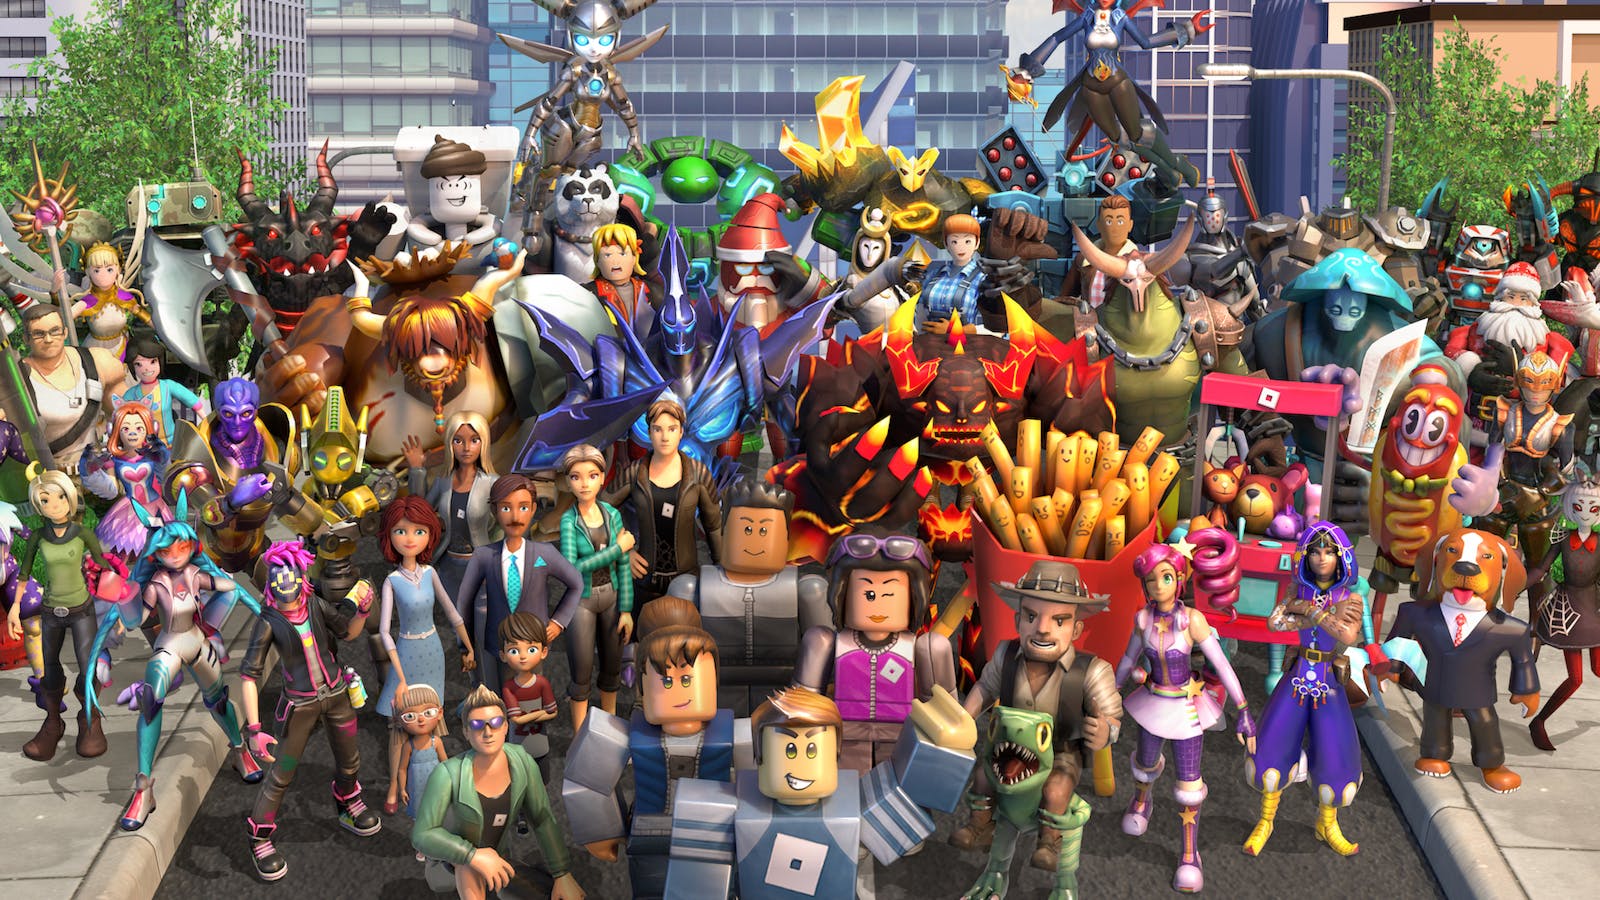 A collection of various Roblox user avatars. Credit: Roblox